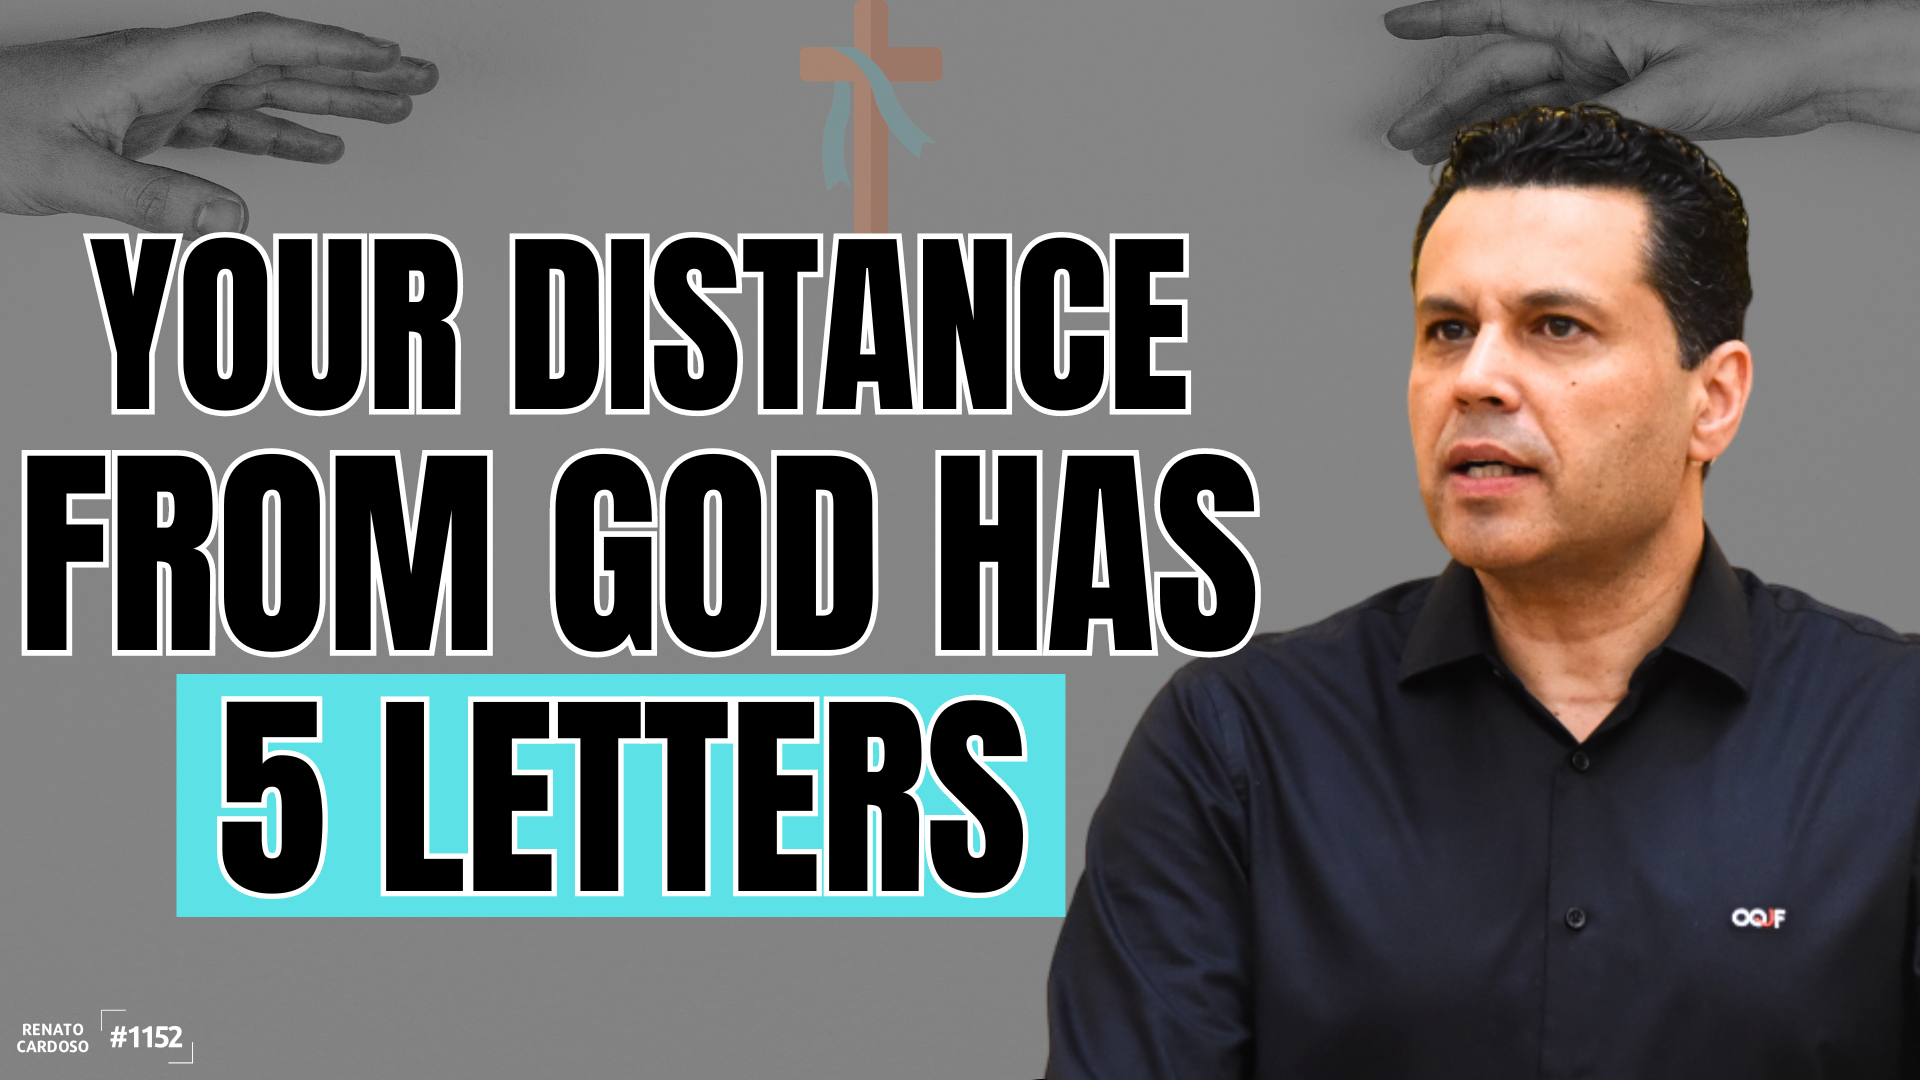 1152 &#8211; YOUR DISTANCE FROM GOD HAS 5 LETTERS